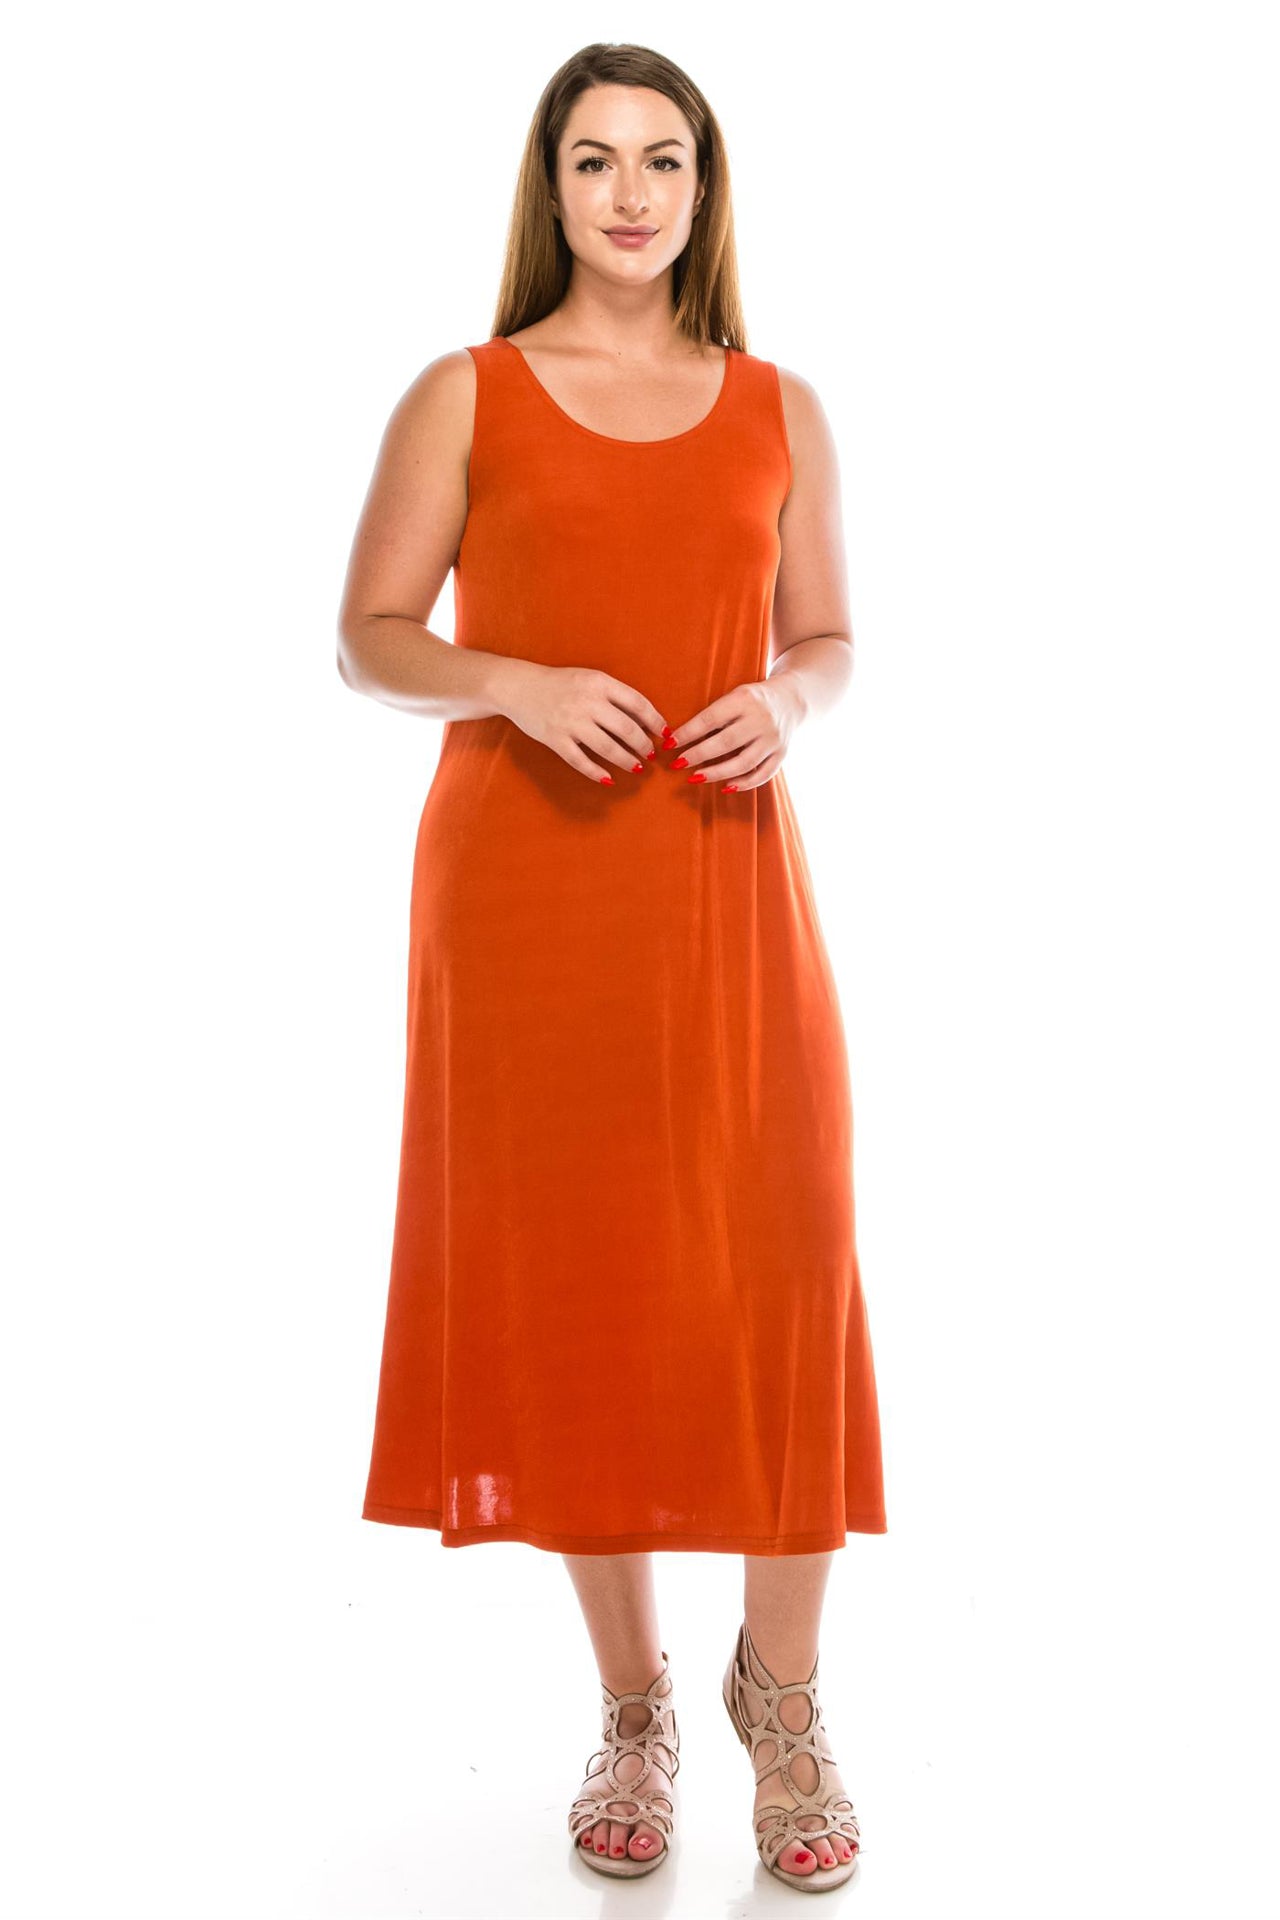 90% polyester / 10% spandex  Treat yourself to effortless elegance with this flowy, feminine dress. Boasting a round neckline and wrinkle-free fabric, this dress is perfect for any and every occasion. Step out in style and turn heads wherever you go!  Hand or machine wash in cold water.  Made in U.S.A